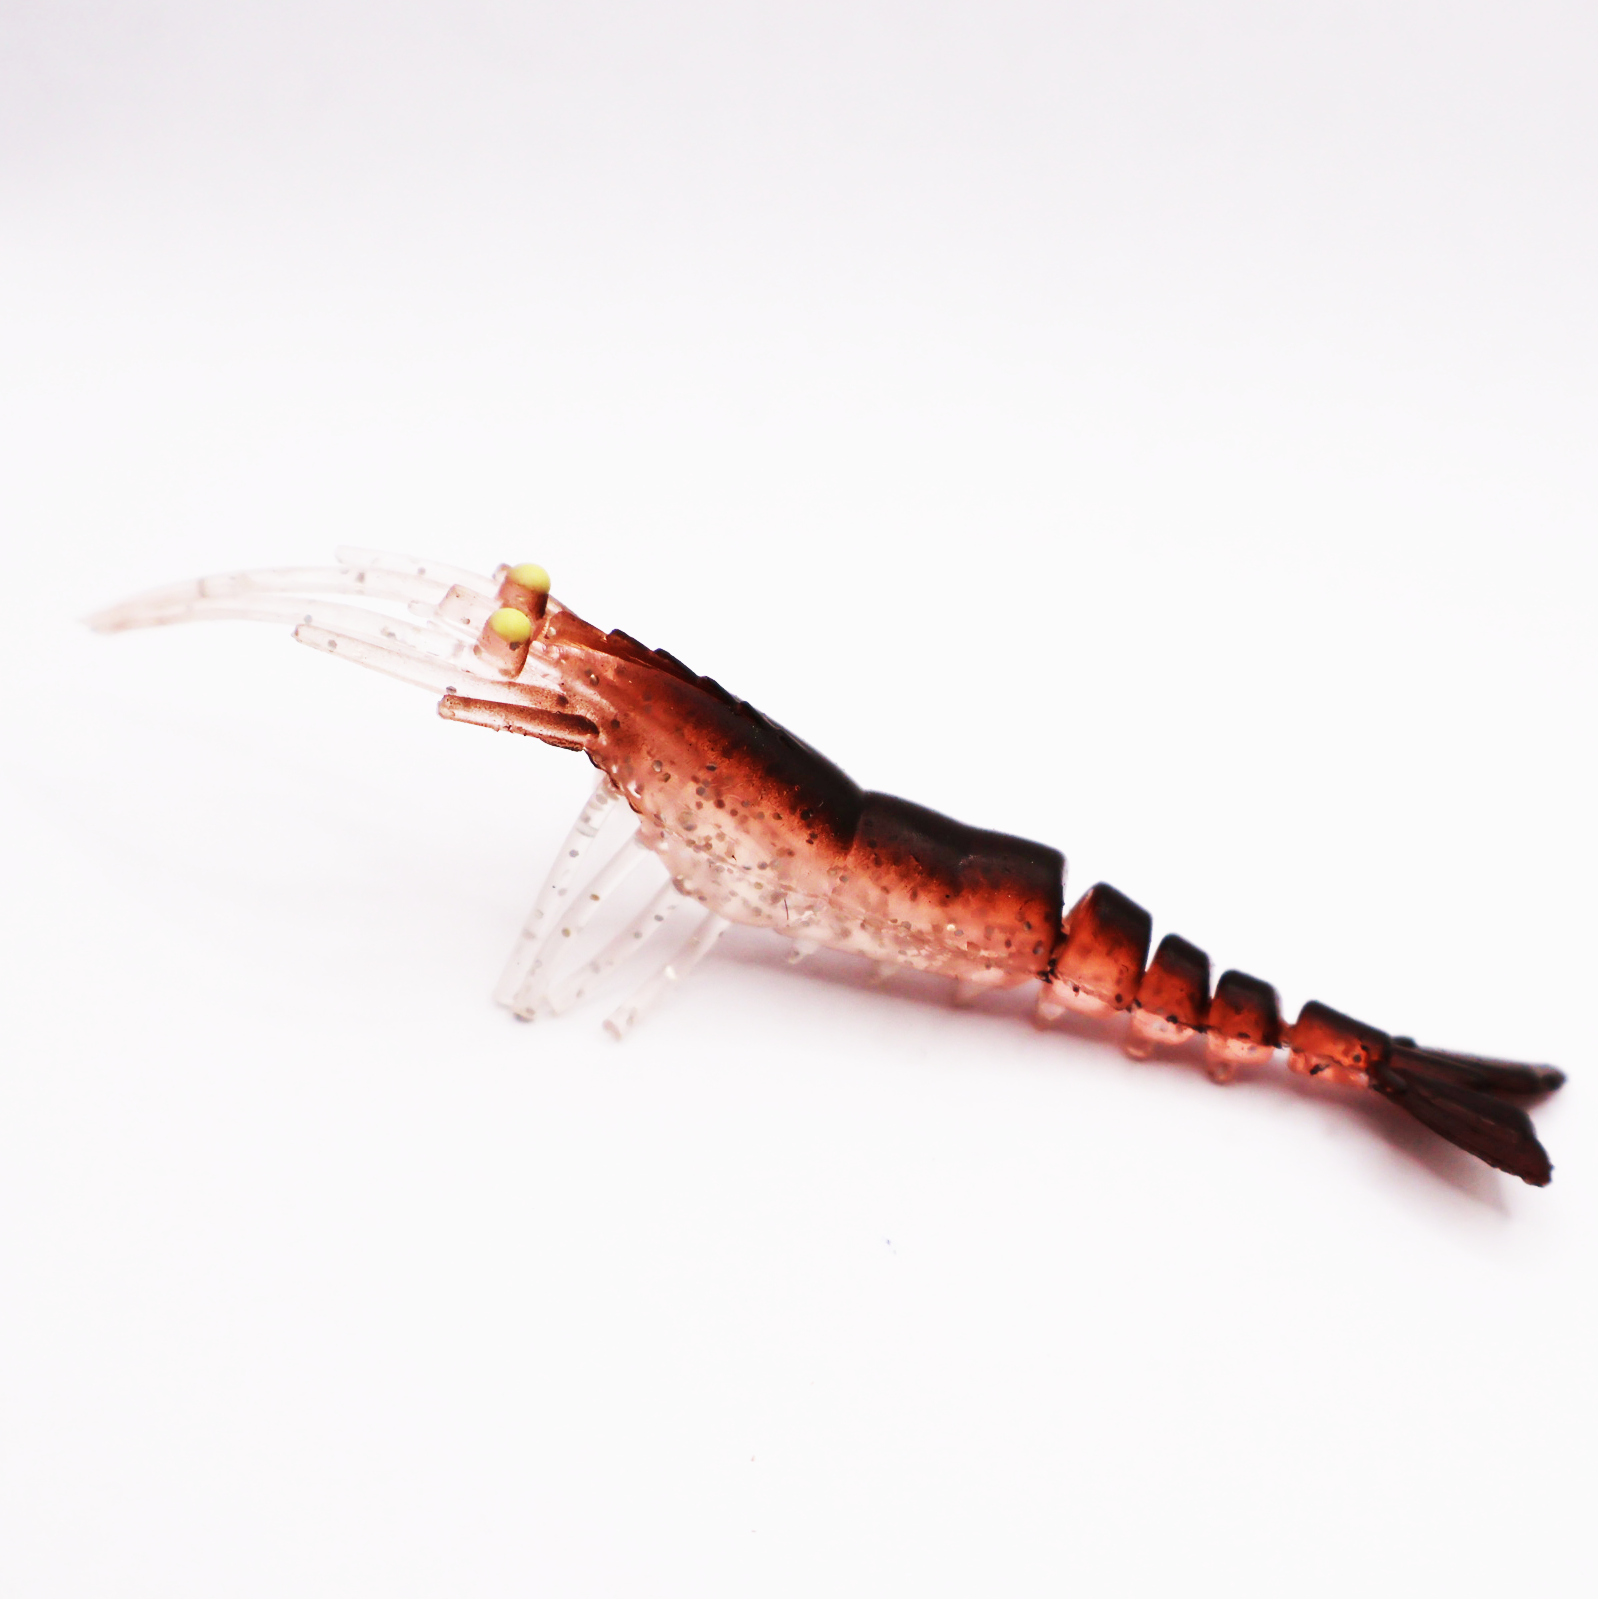 S Tackle Tail Dancer Natural Prawn UV Flasher Lure 3D 4.5" - 2 Pack